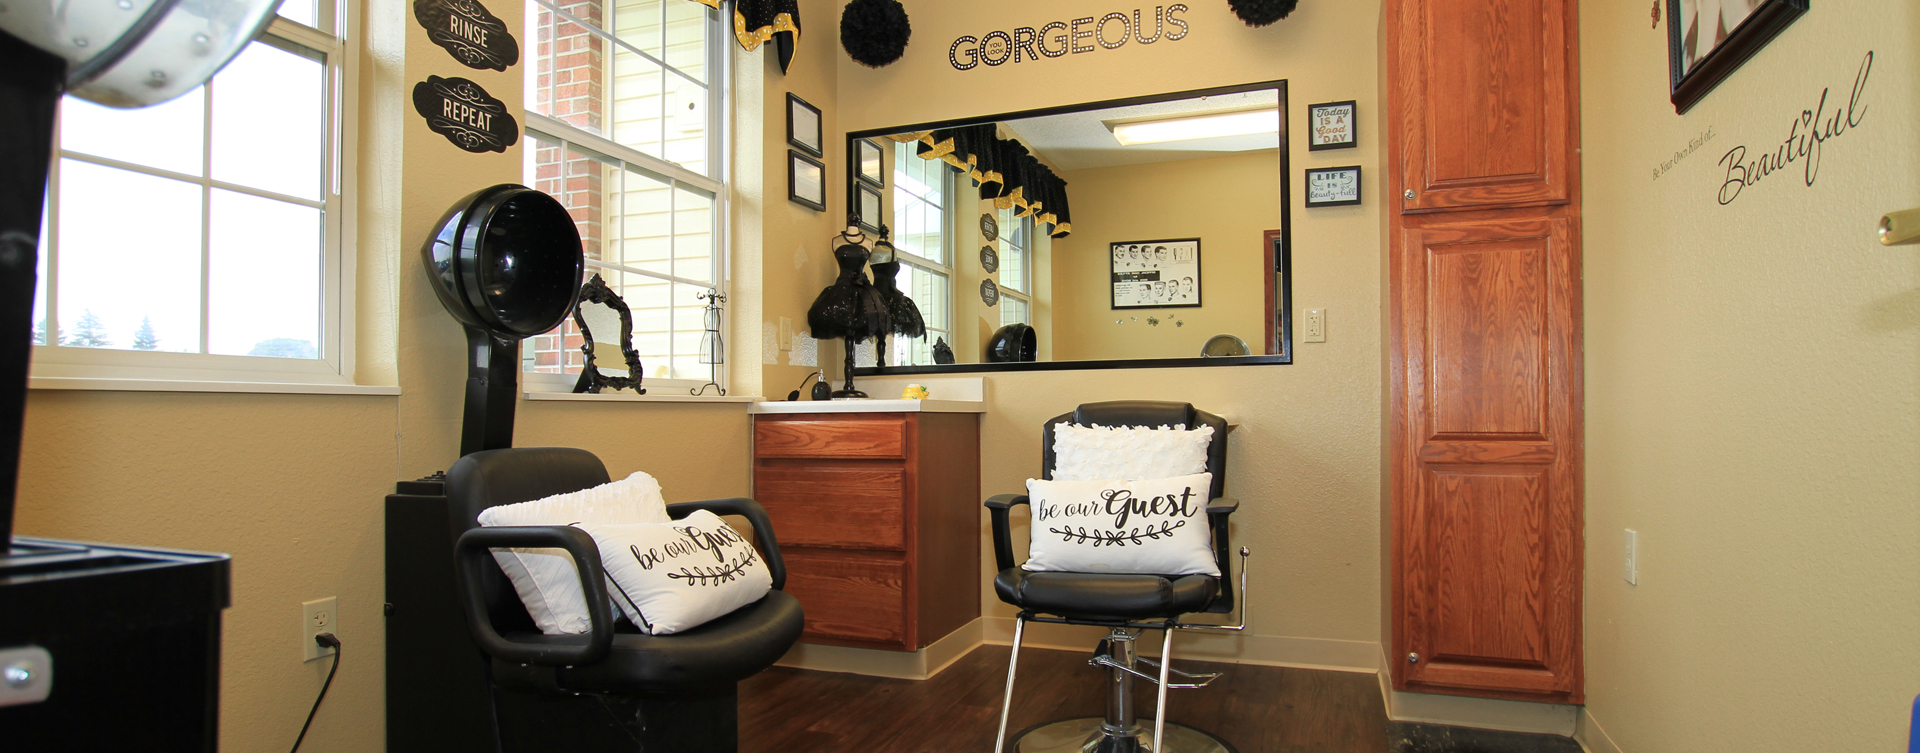 Strut on in and find out what the buzz is all about in the salon at Bickford of Saginaw Township